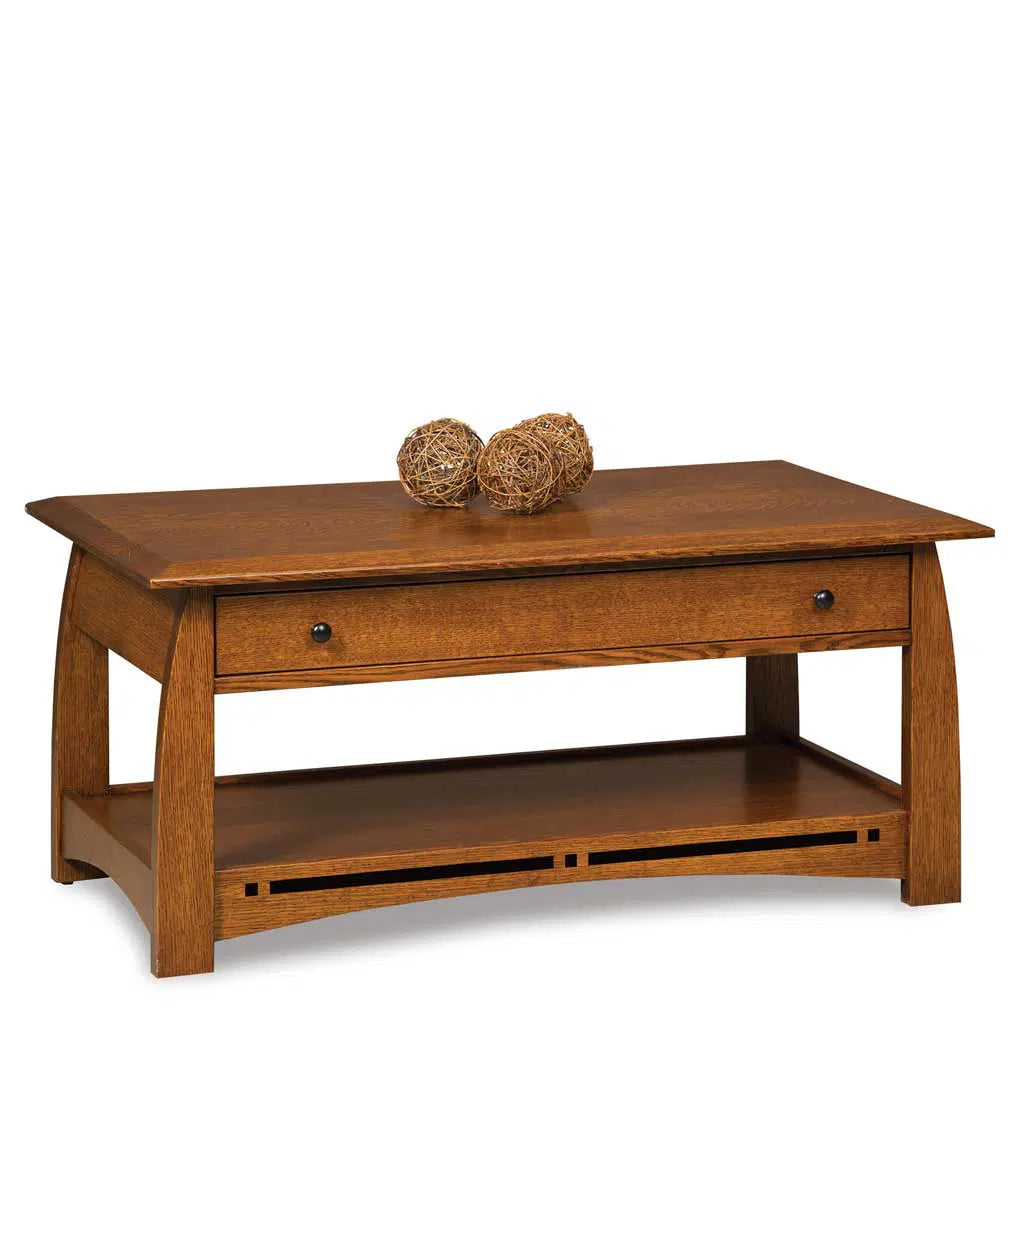 Amish Boulder Creek Open Coffee Table with Drawer - Quick Ship